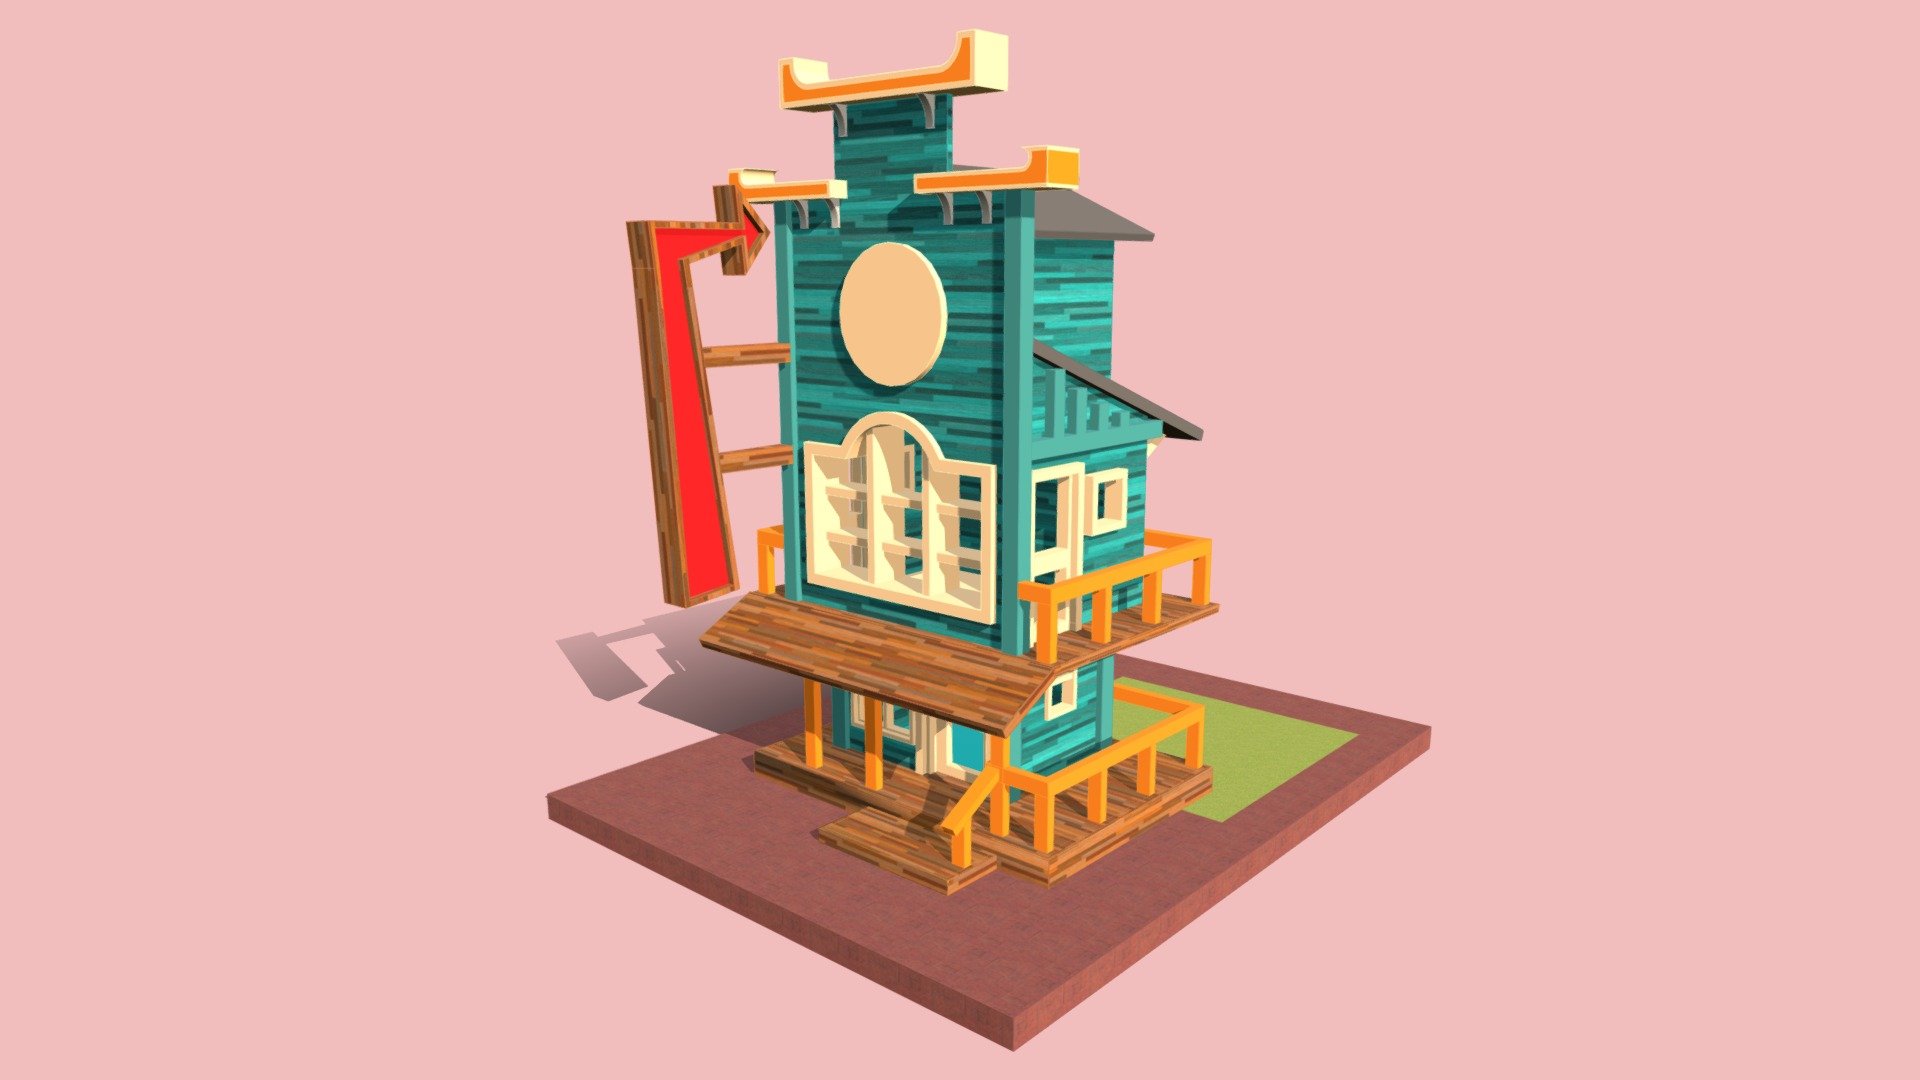 Thus small cowboy pub house project is for 3D game environment design. The Chinese game producer would like to combine the idea of the cowboy movie and some Chinese architectural elements. Therefore, We've designed the whole 19th-century cowboy-style game. Our design was influenced by the great film &ldquo;Cowboy